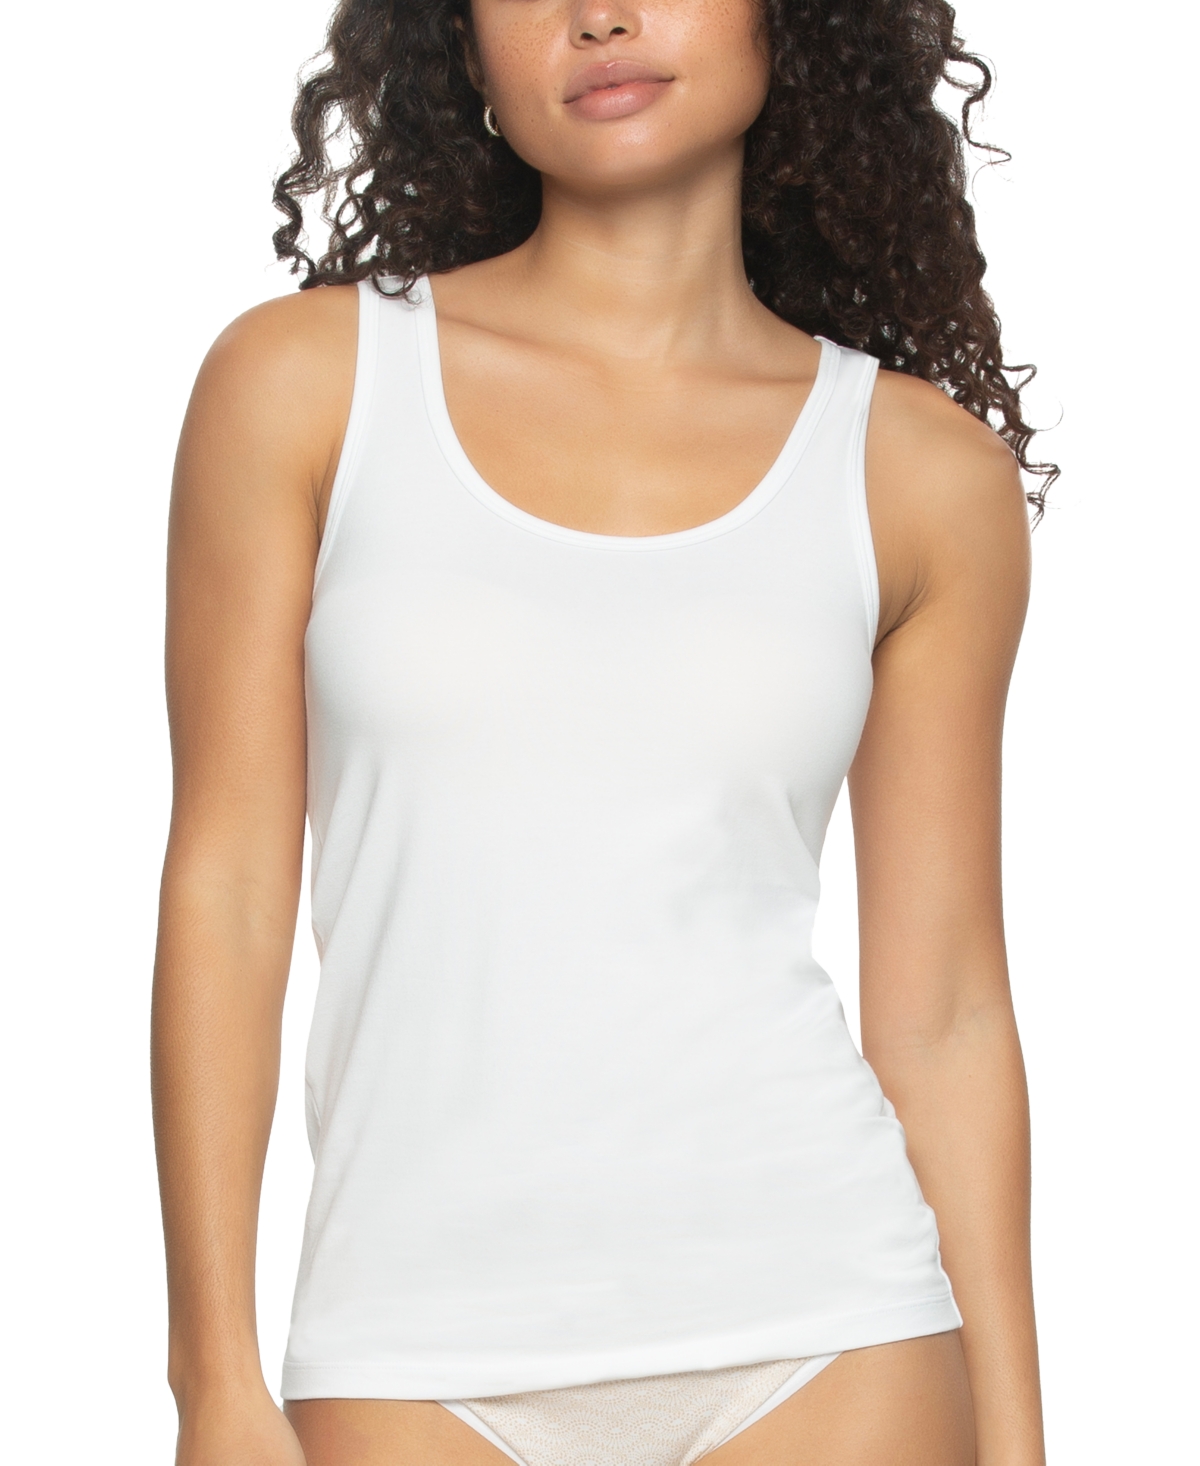 Paramour Women's 2-pk. Tank 780180p2, Created For Macy's In White,whit